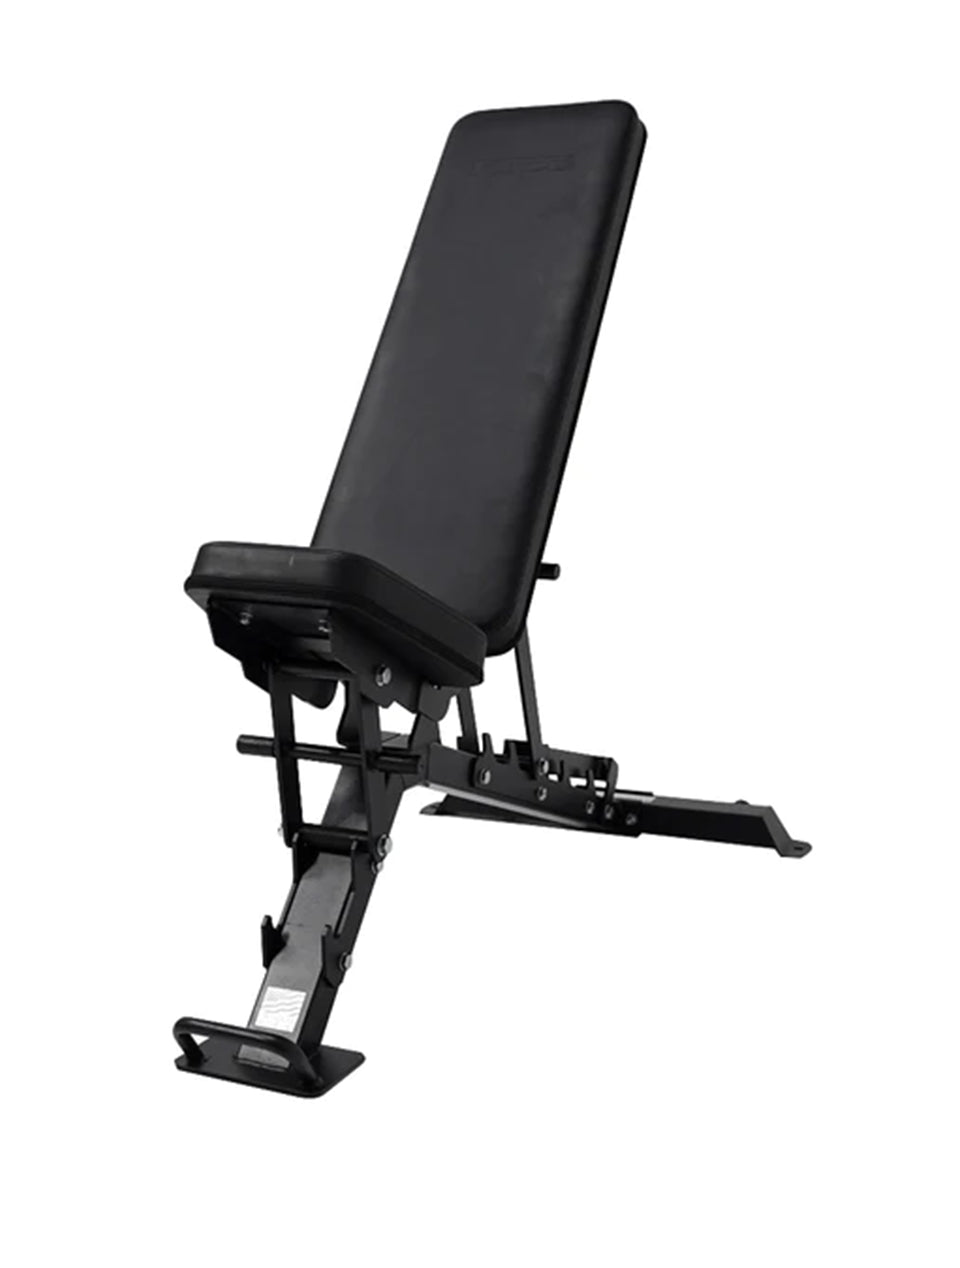 Force USA Commercial Adjustable Bench